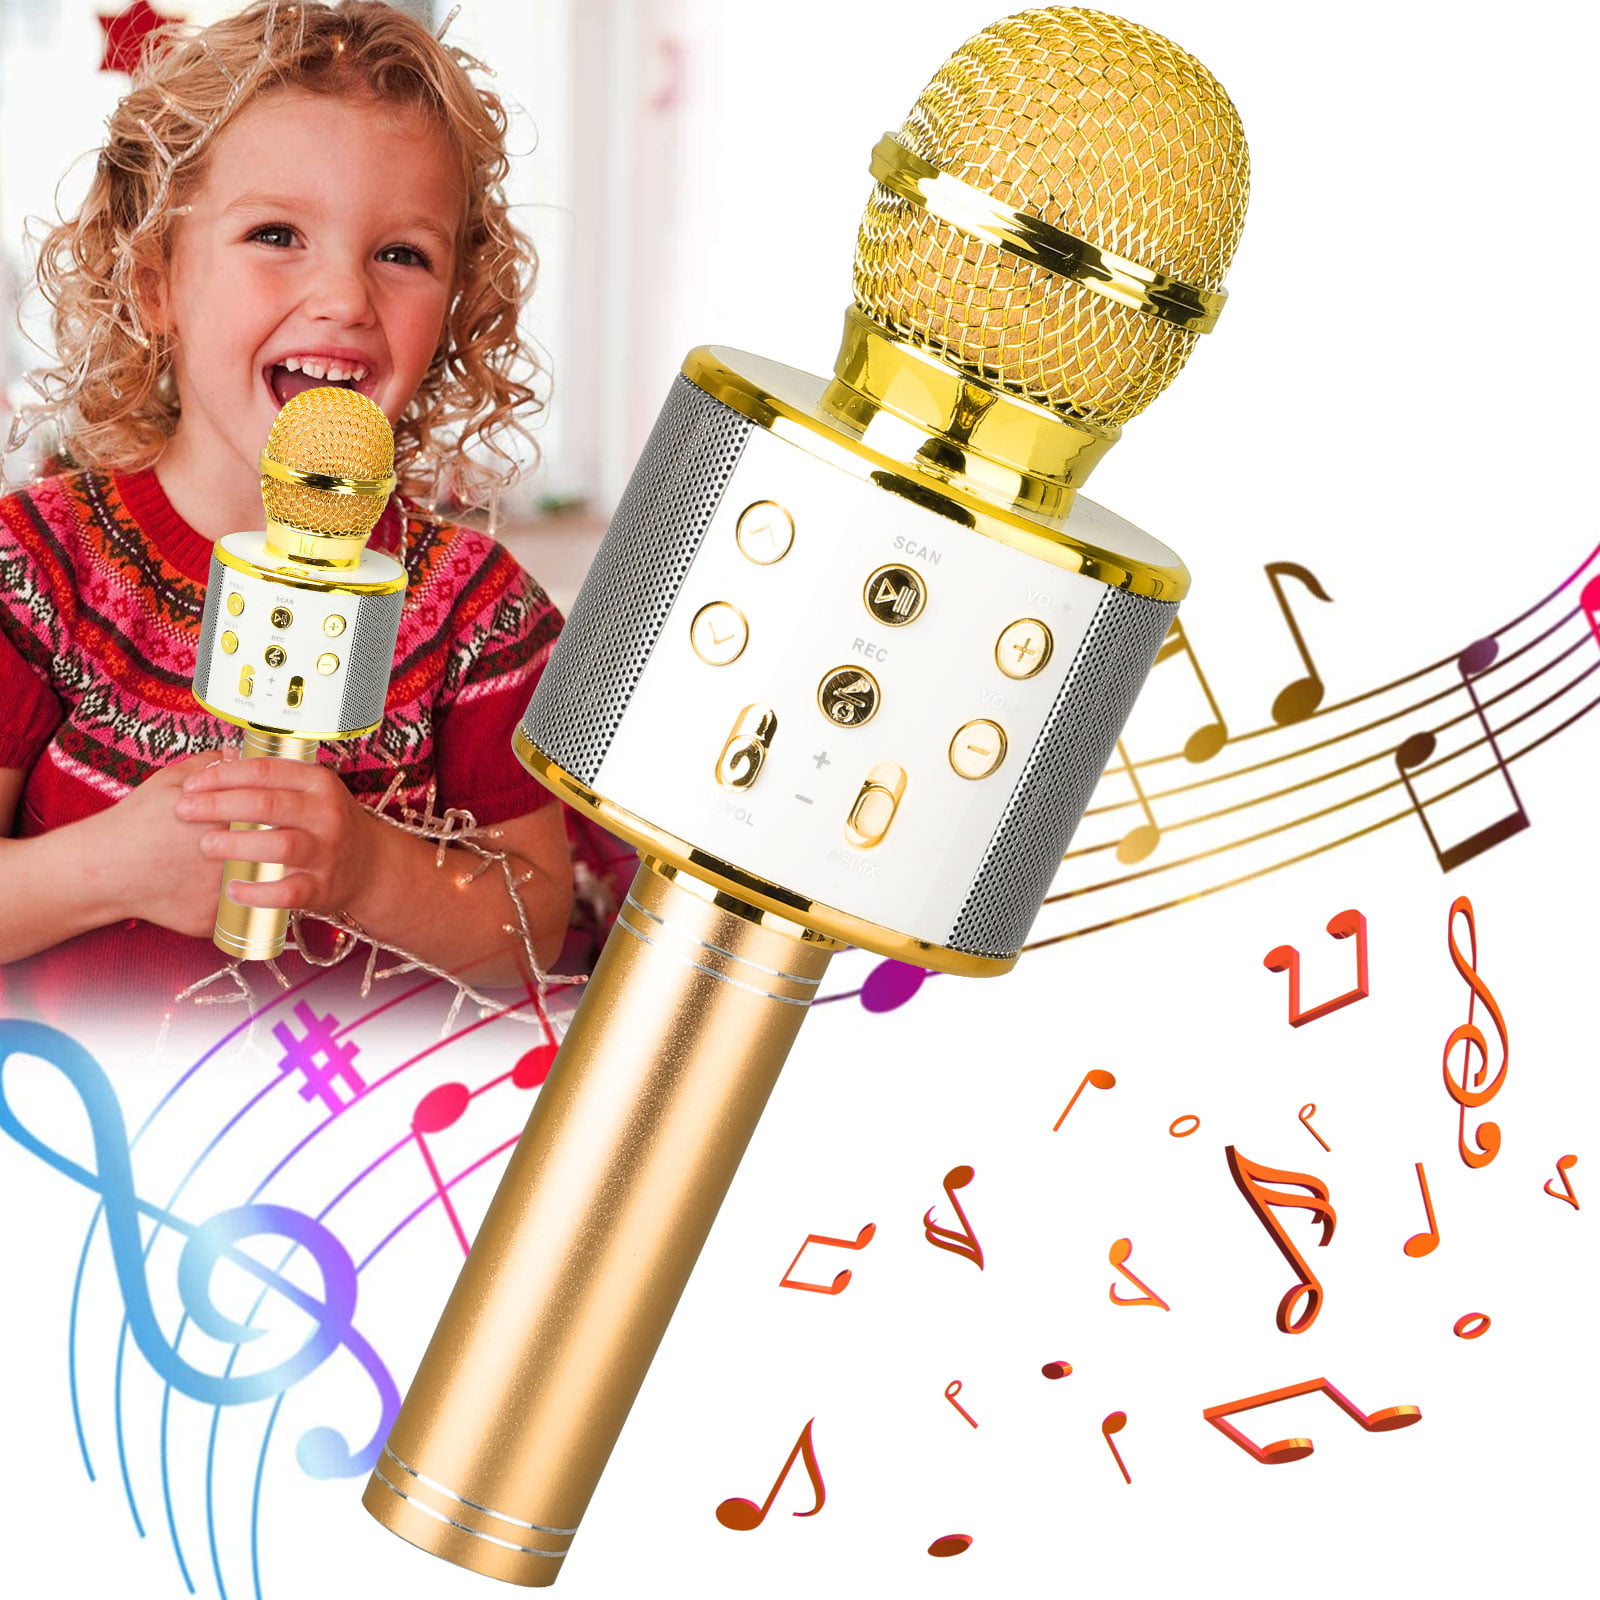 Annstory Wireless Bluetooth Karaoke Microphone,Kid Girl Top Christmas Birthday Gift Toy,2019 Best Gift Presents for Girl Kid Boy Children Age 5 6 7 8 9 10 11 12 Years Old Rose Gold